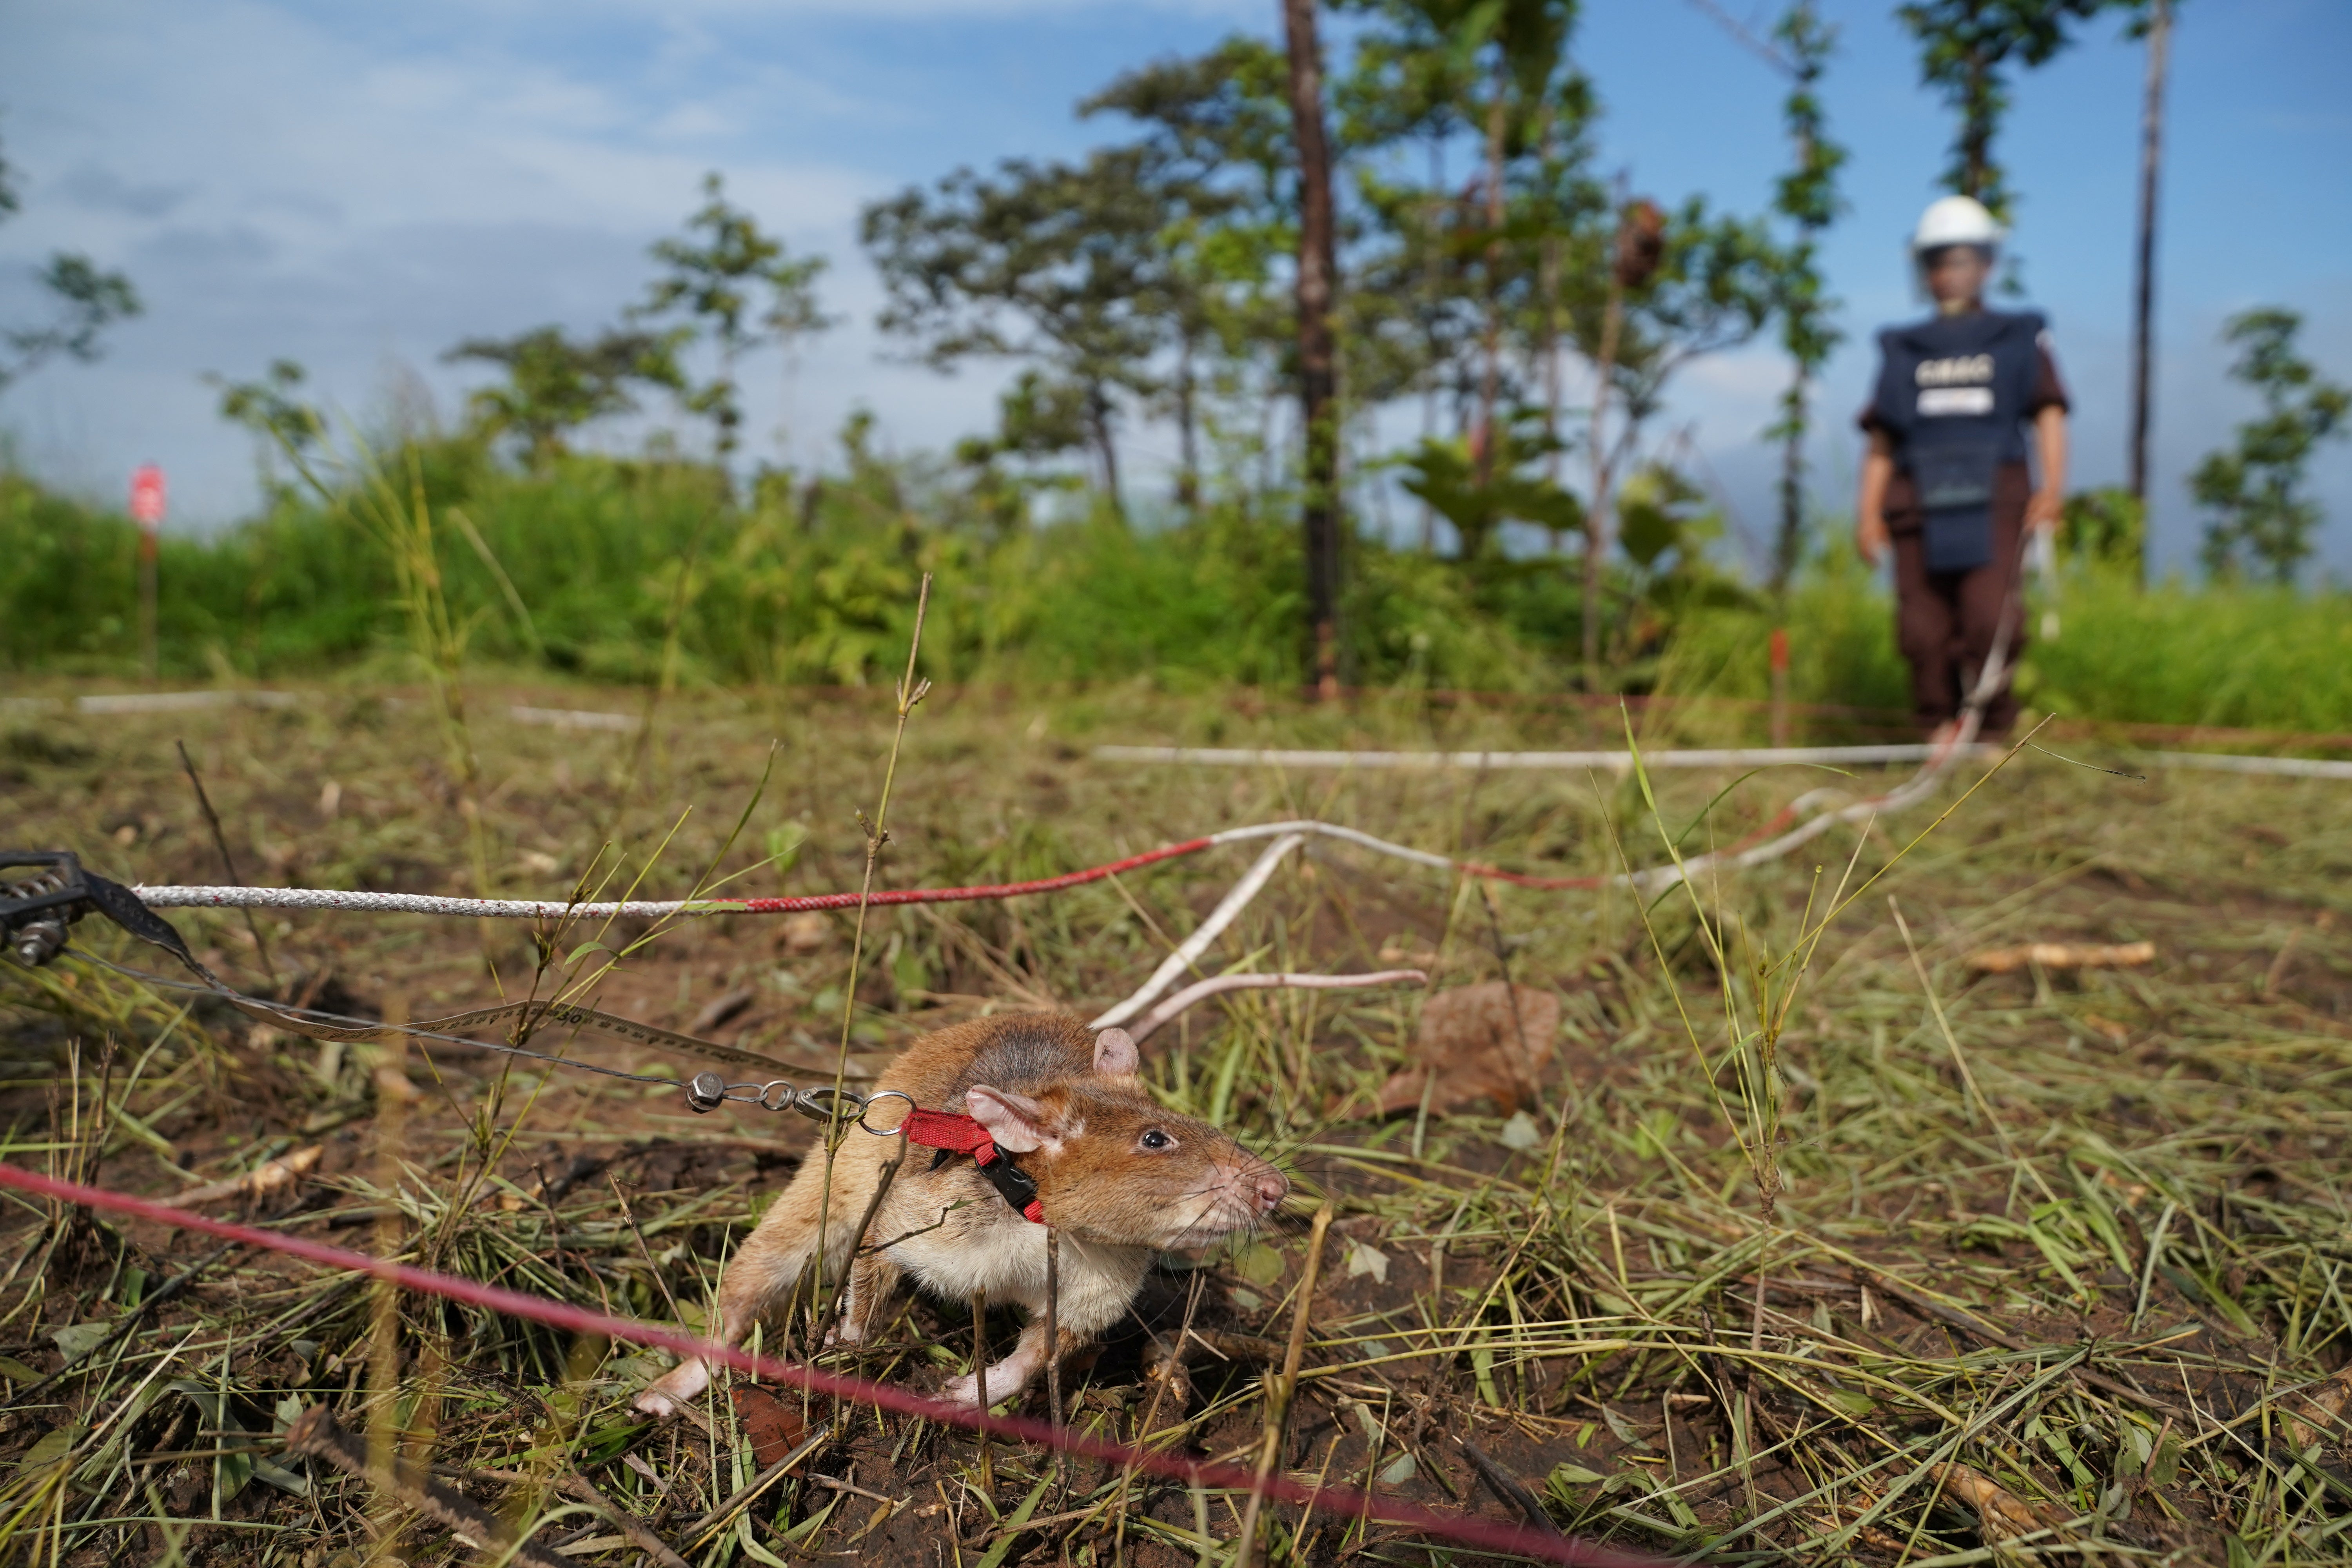 A mine detection rat sniffs for landmines in an area being demined in Preah Vihear province, Cambodia